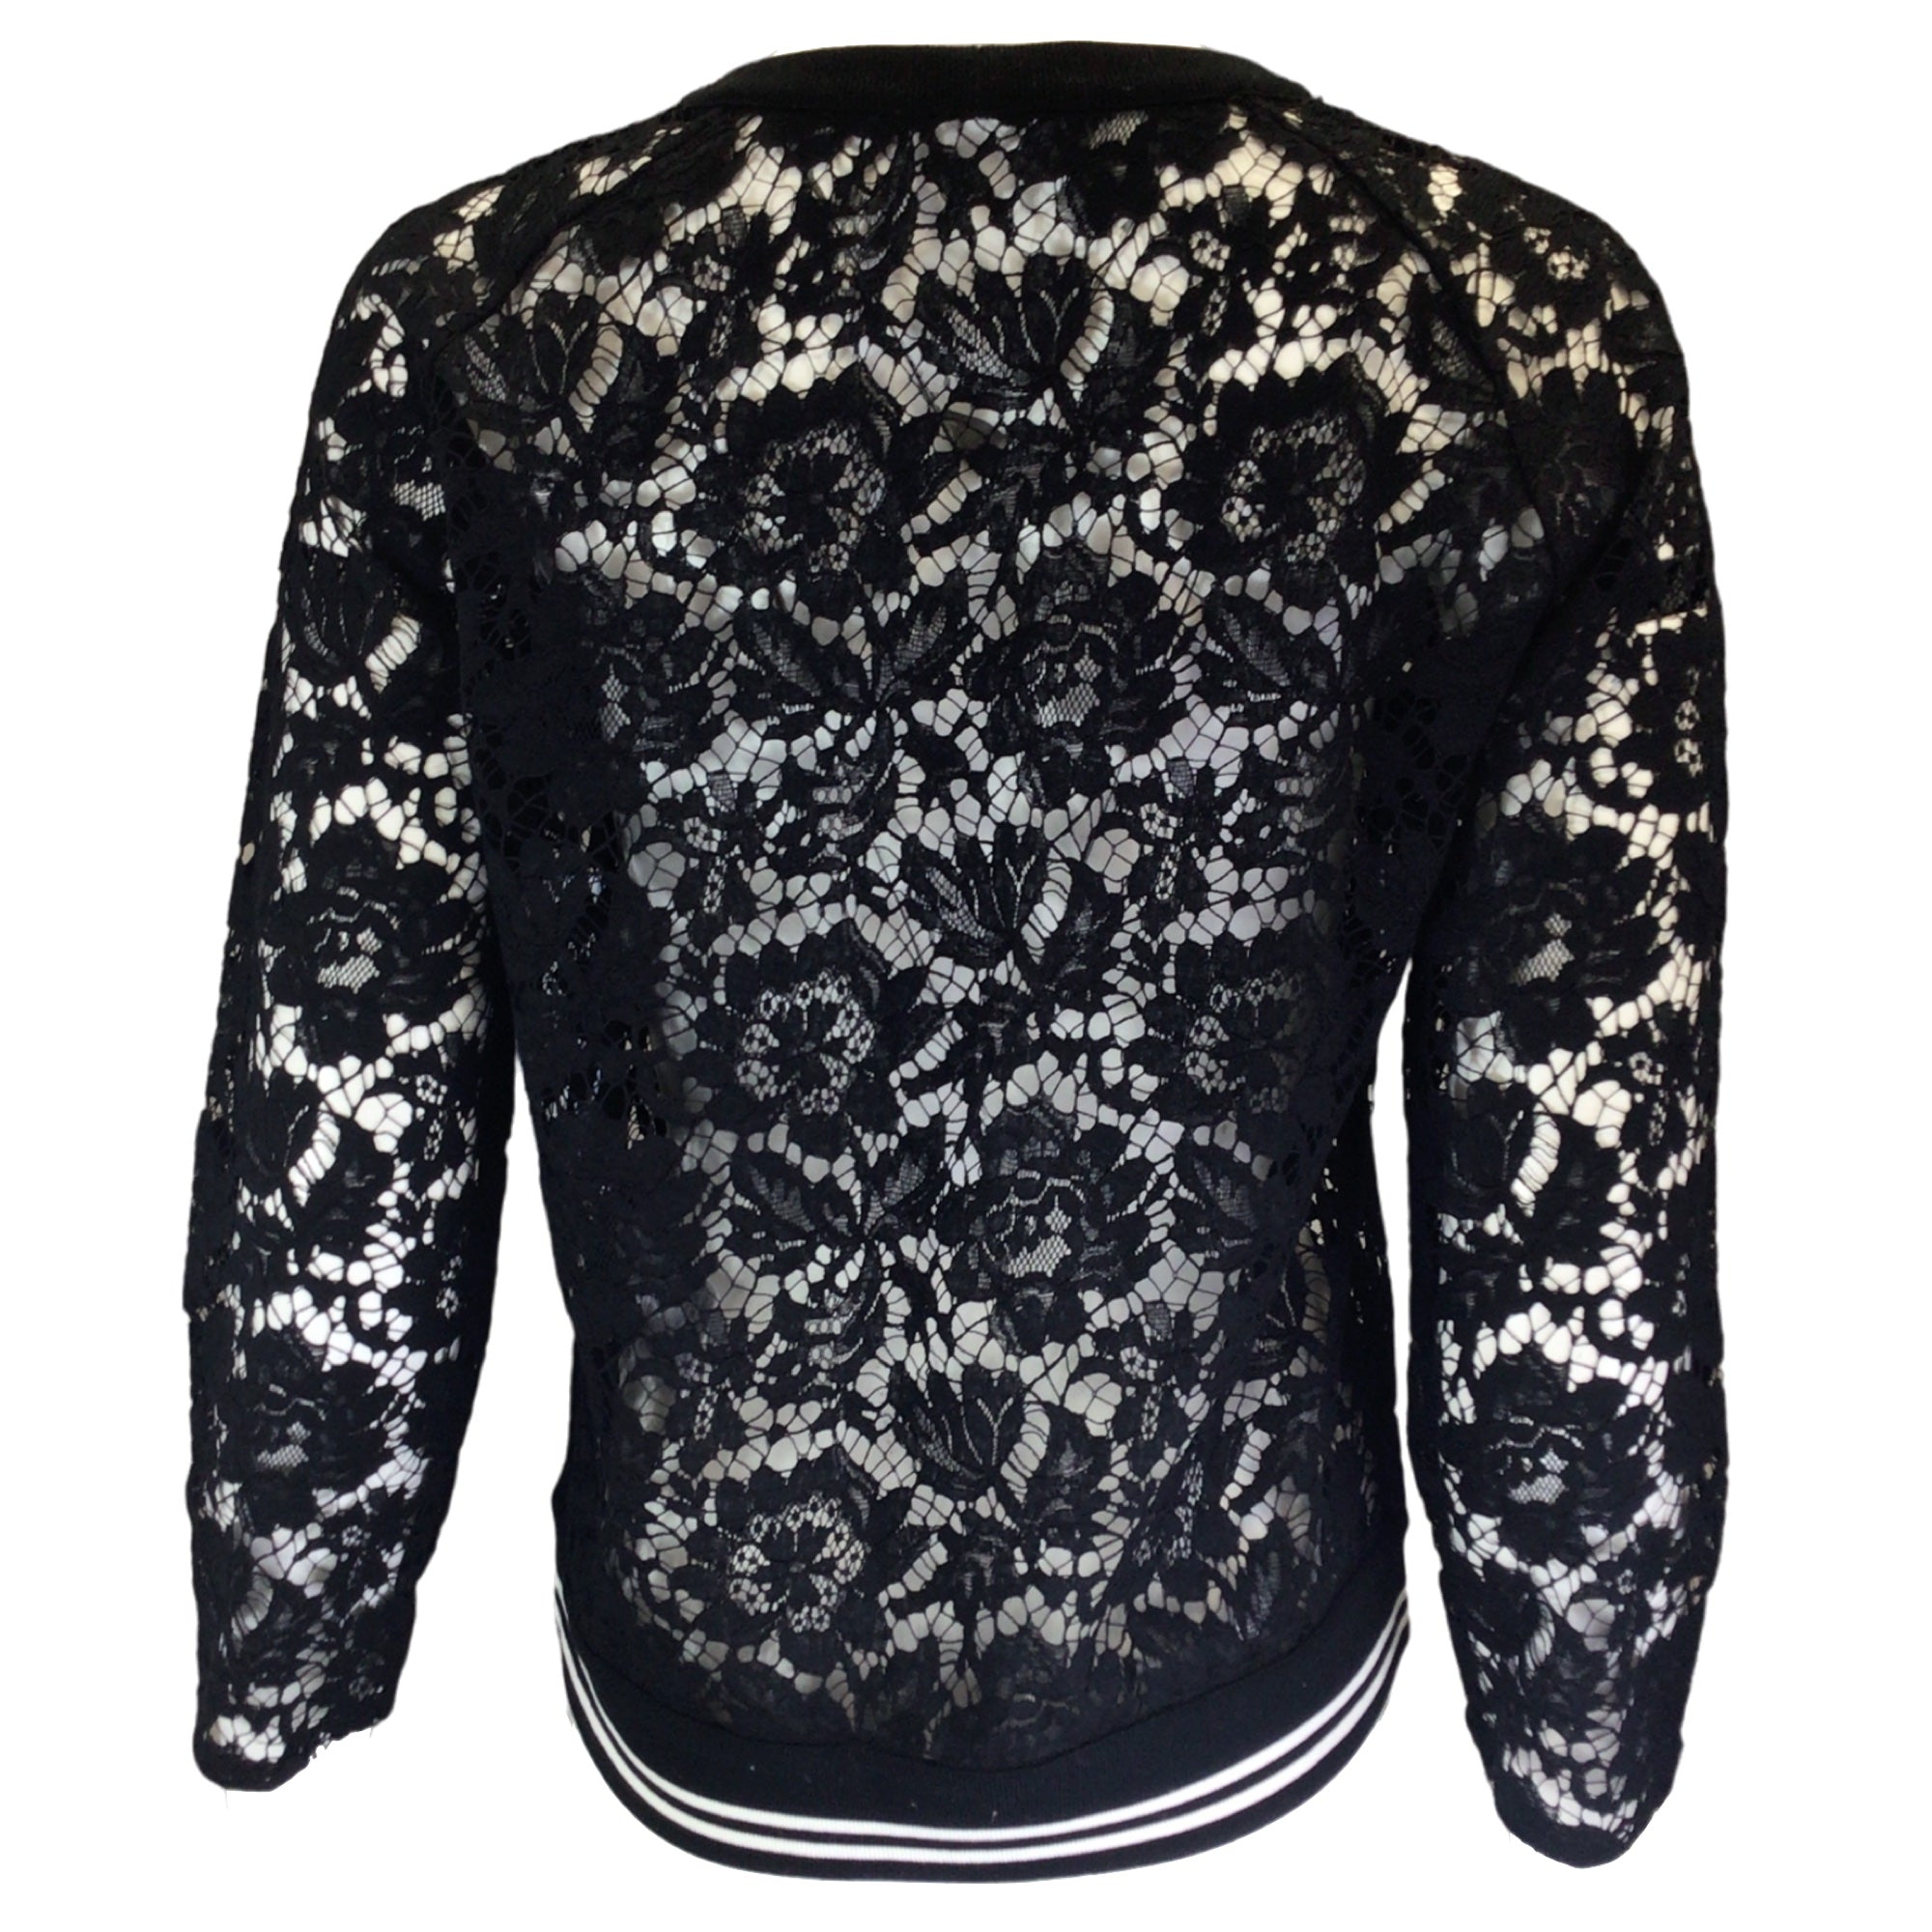 Valentino Black Long Sleeved Lace Top